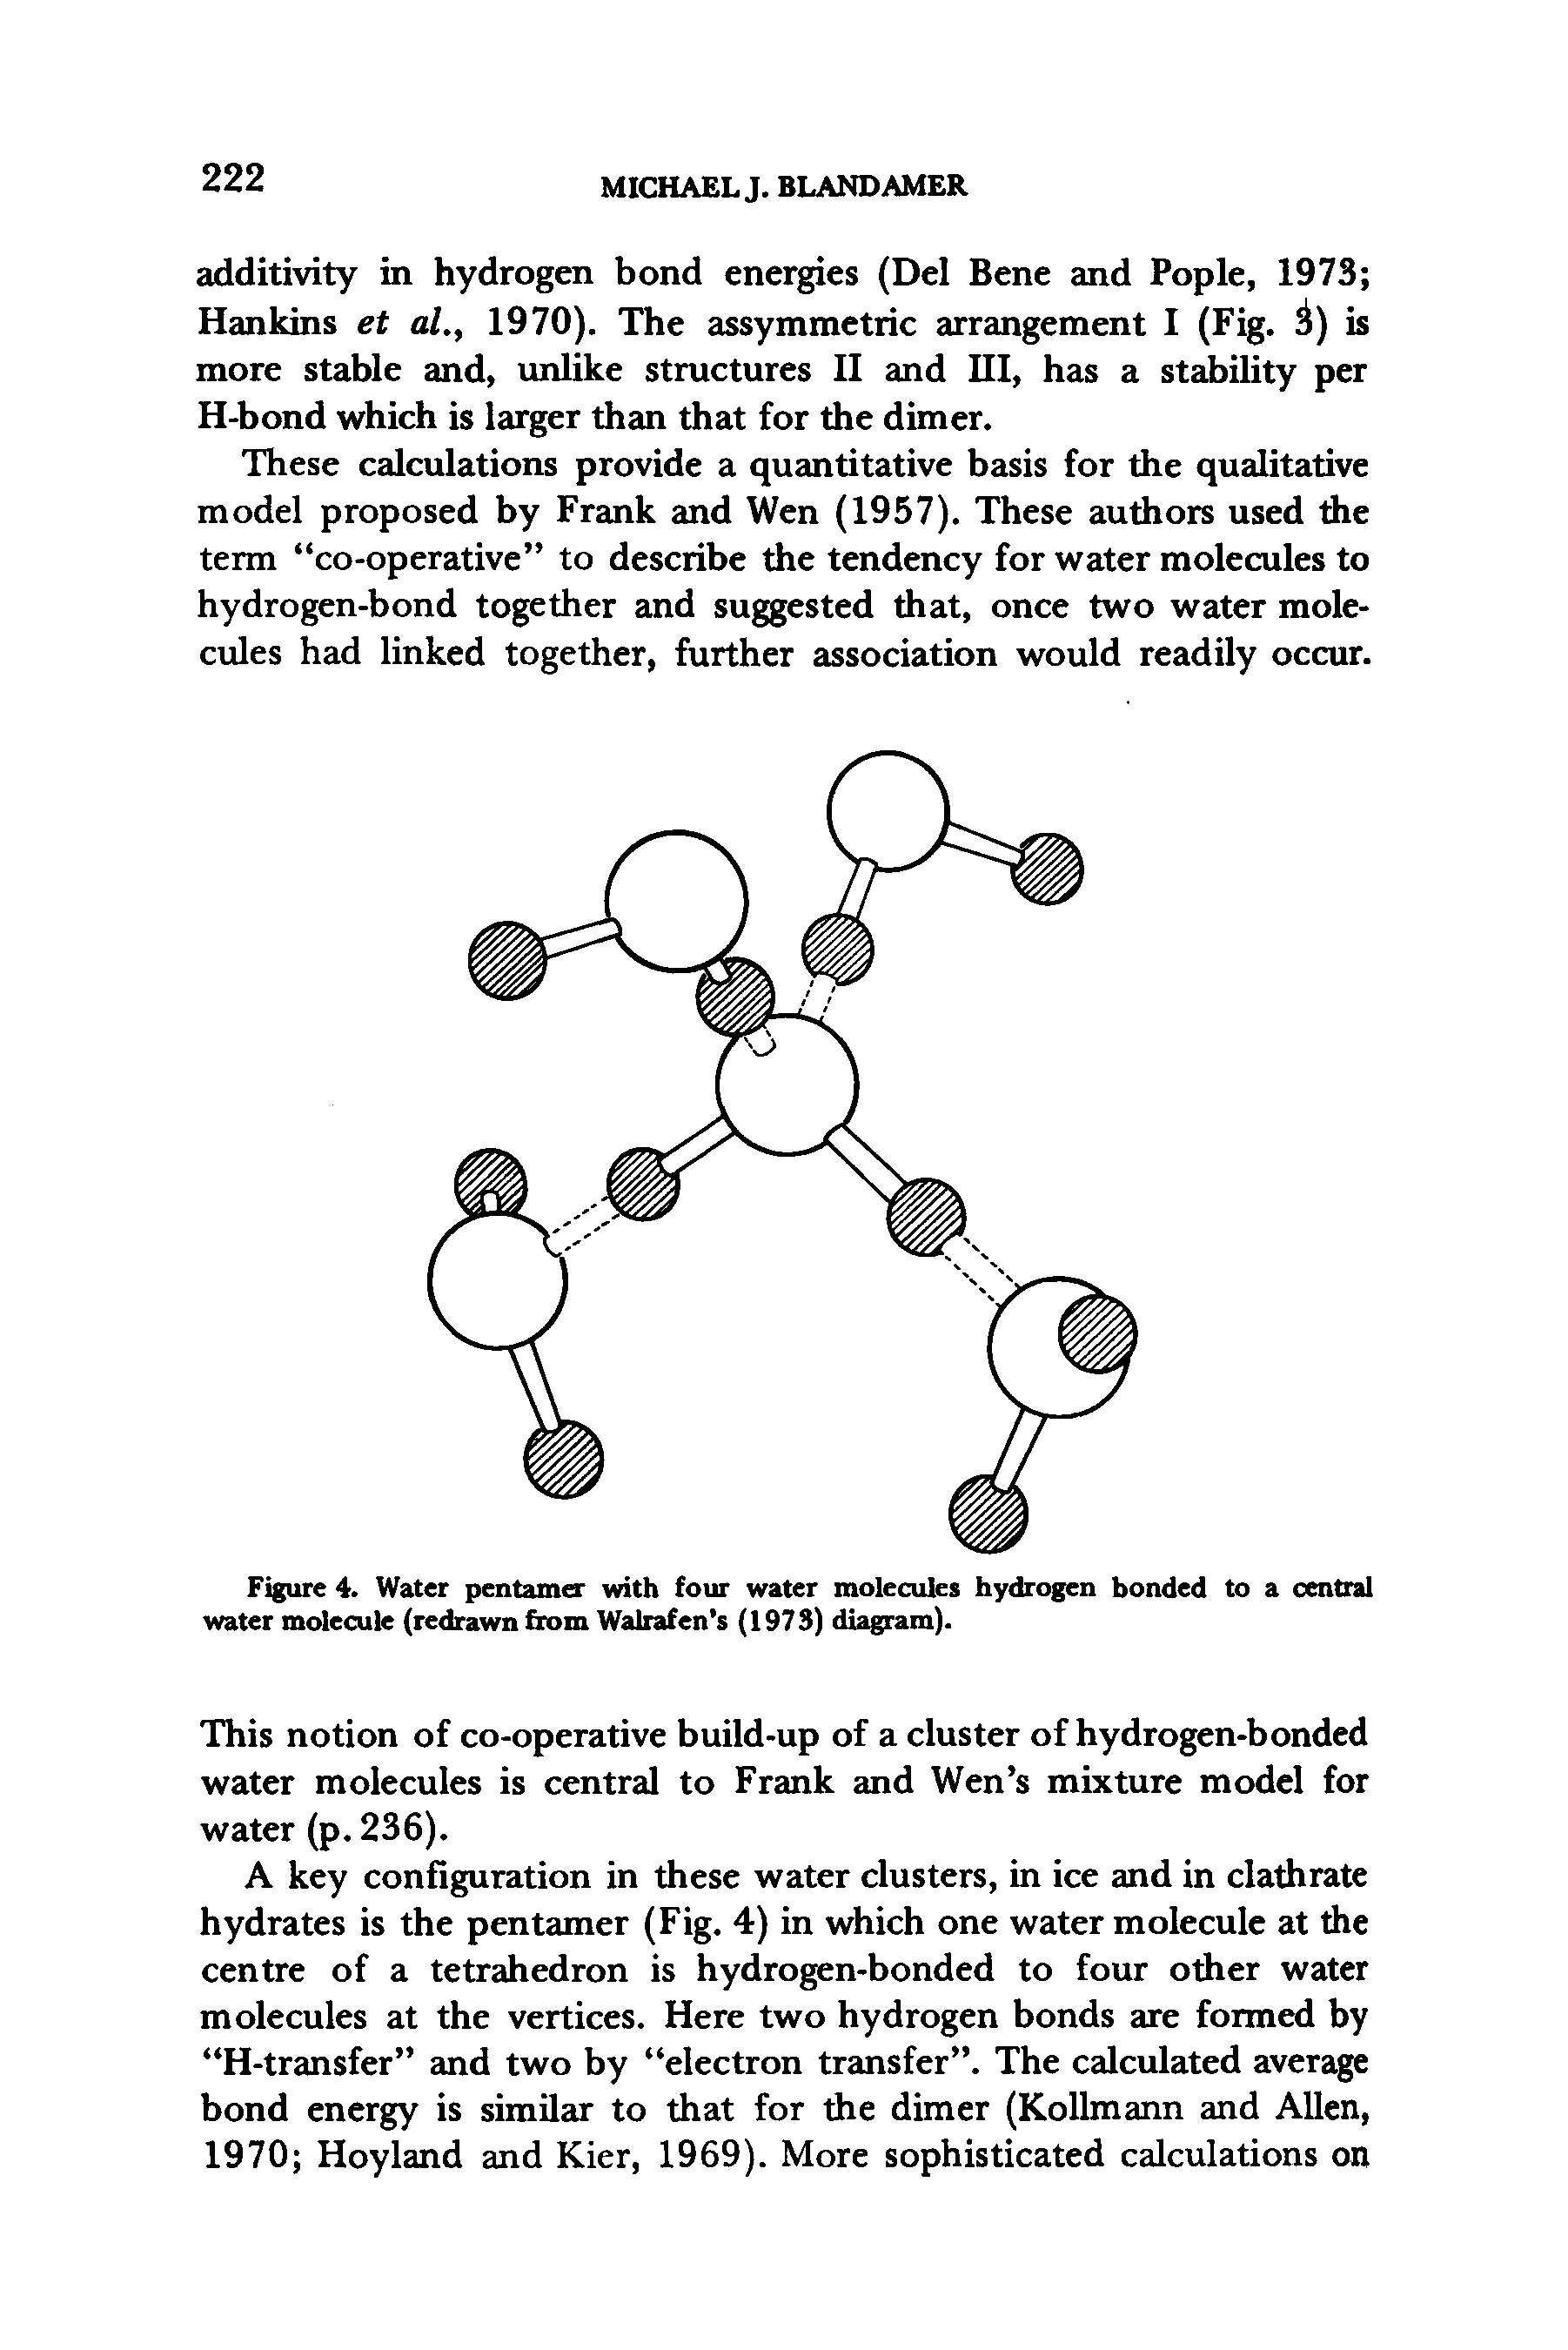 Figure 4. Water pentamer with four water molecules hydrogen bonded to a central water molecule (redrawn from Walrafen s (1973) diagram).